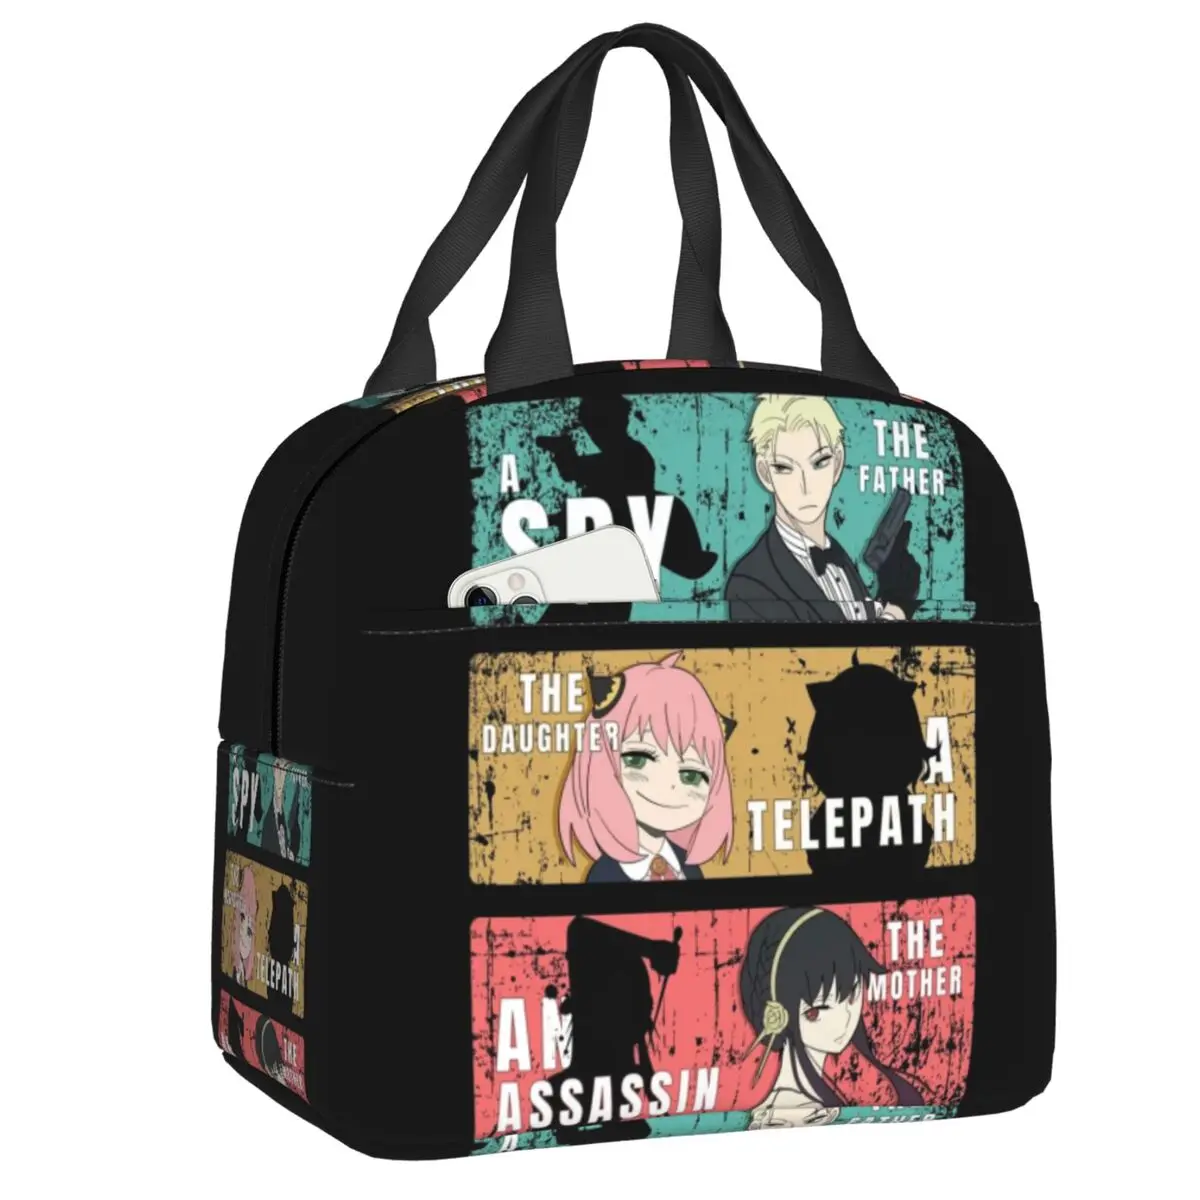 Spy X Family Loid Forger Anya Manga Anime Thermal Insulated Lunch Bag Lunch Tote for Work School Travel Multifunction Food Box